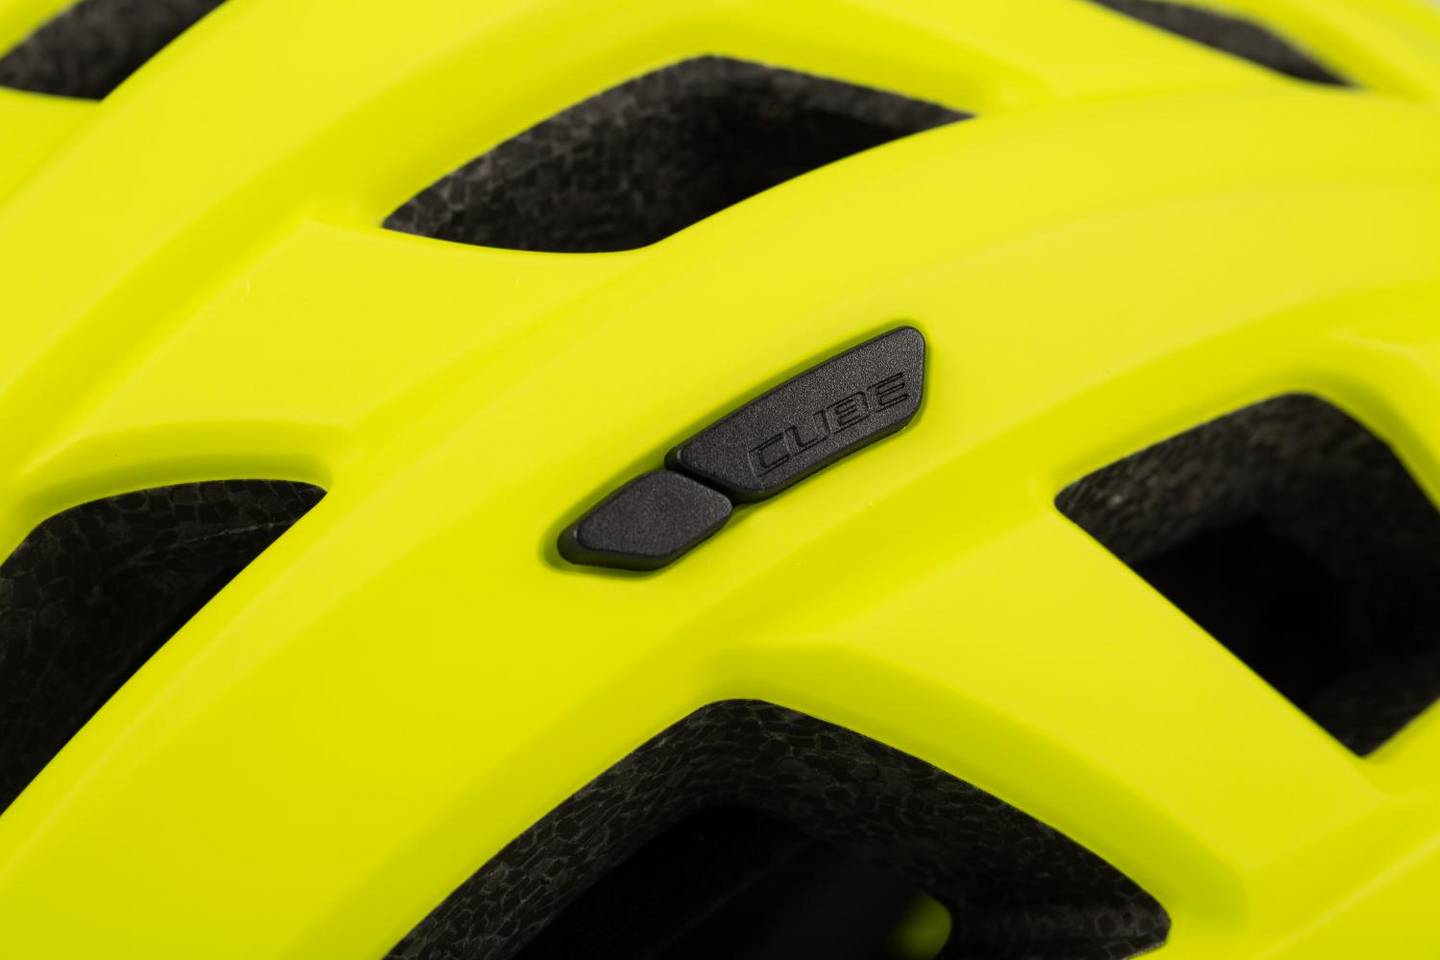 CUBE Helm ROAD RACE  / yellow S/M (53-57)